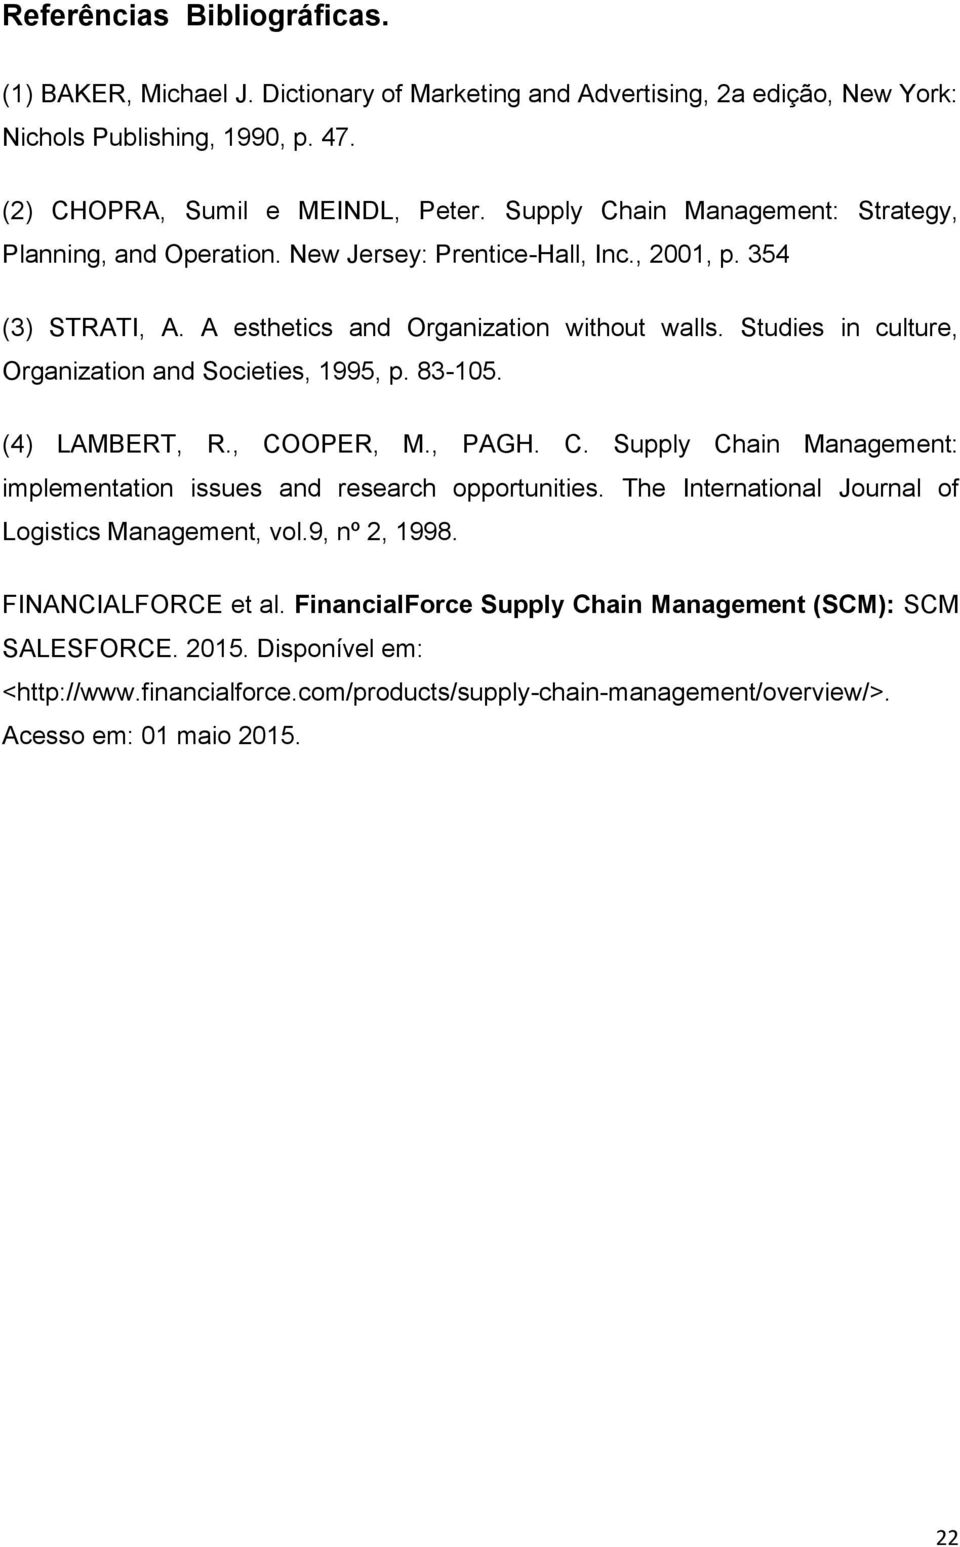 Studies in culture, Organization and Societies, 1995, p. 83-105. (4) LAMBERT, R., COOPER, M., PAGH. C. Supply Chain Management: implementation issues and research opportunities.